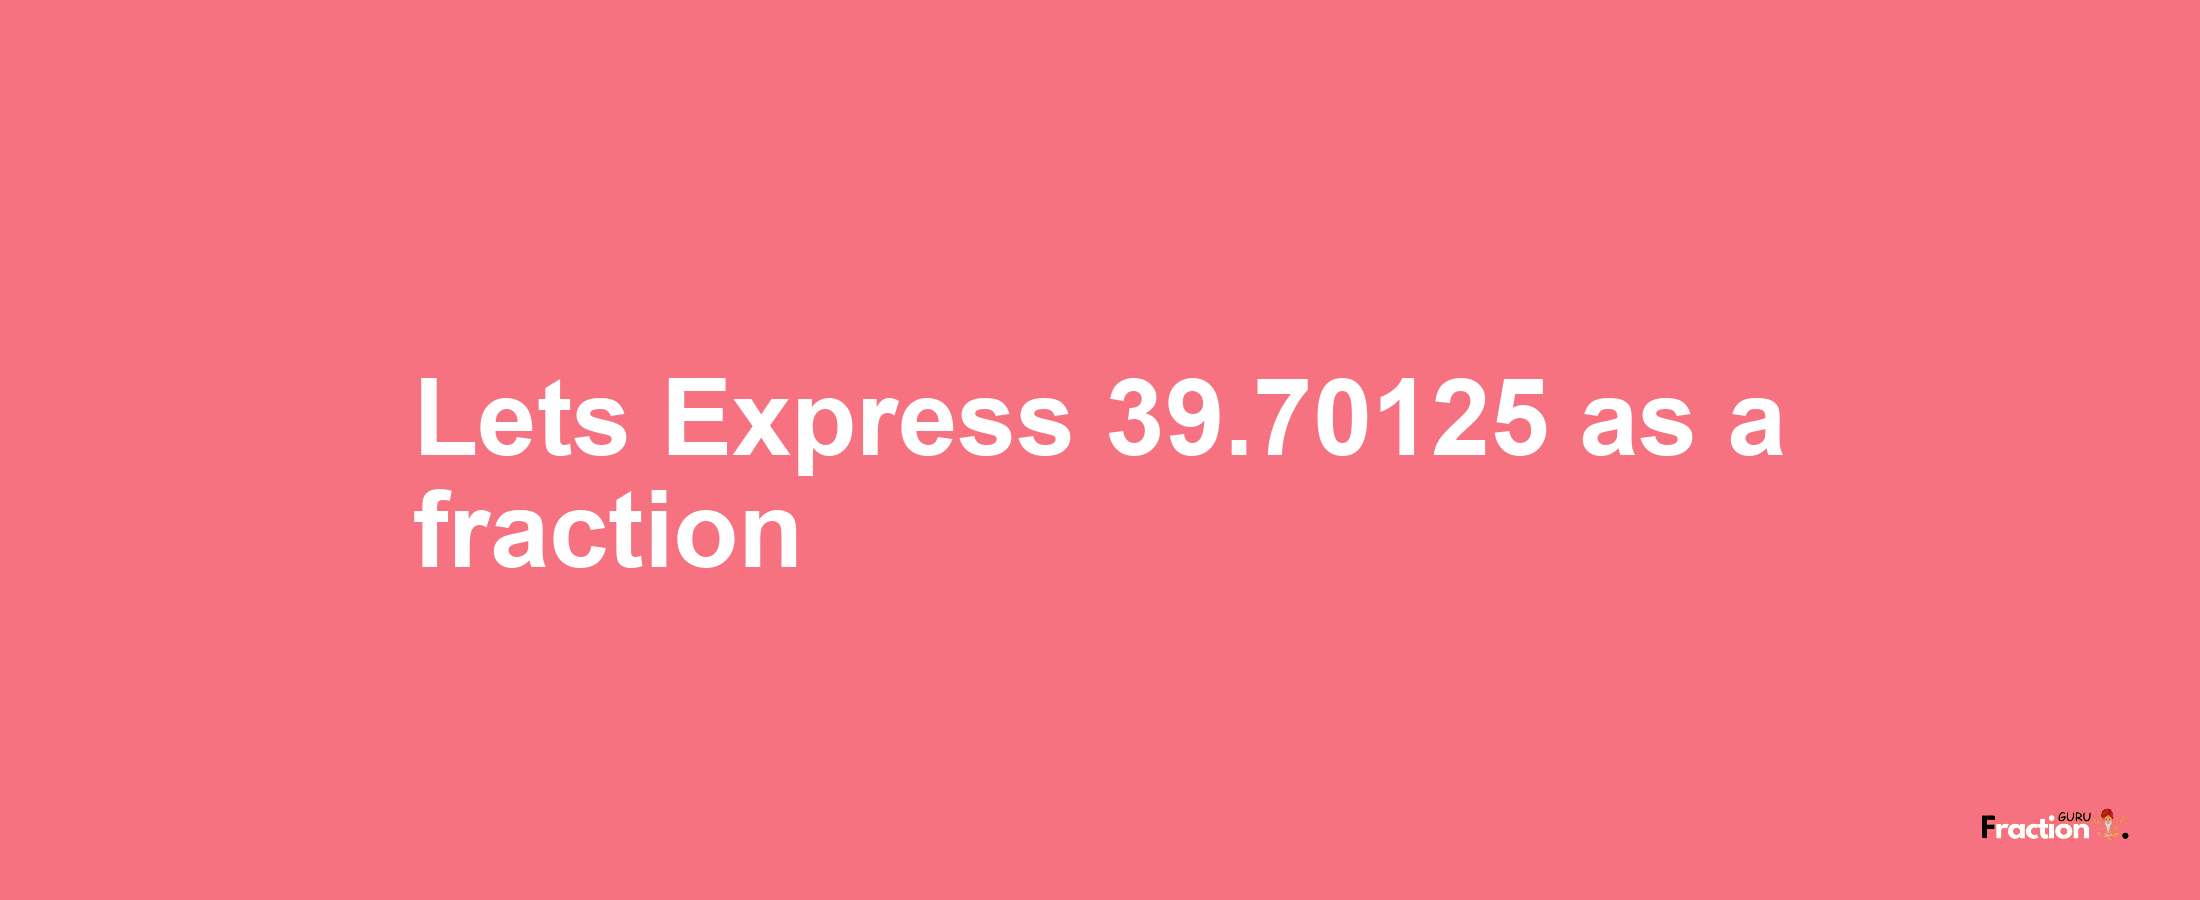 Lets Express 39.70125 as afraction